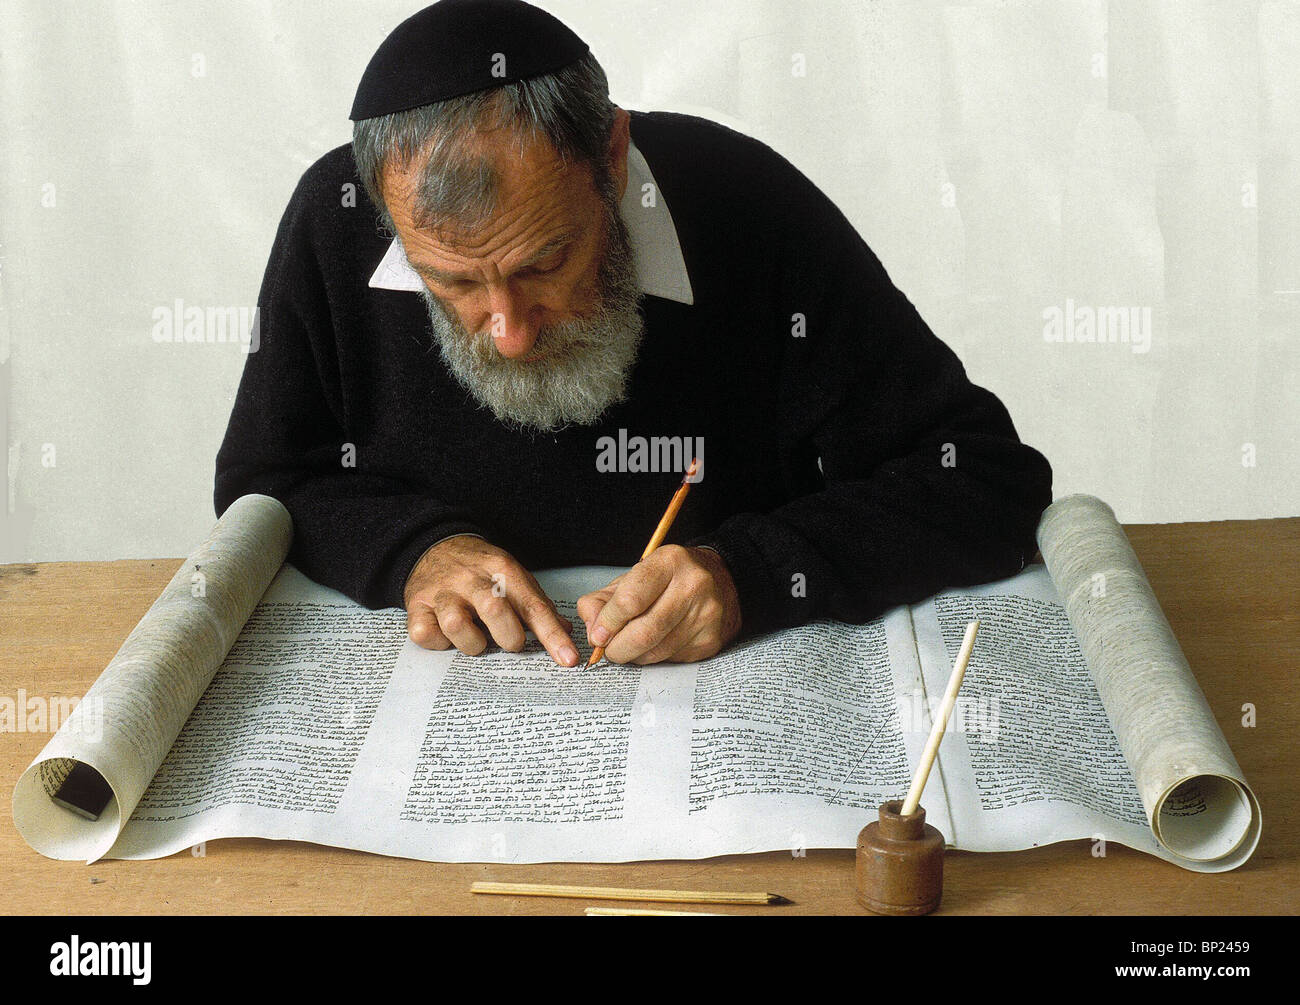 405. THE TORAH SCROLL IS BEING WRITTEN BY HAND, ON PARCHMENT BY A PROFFESIONAL SCRIBE Stock Photo